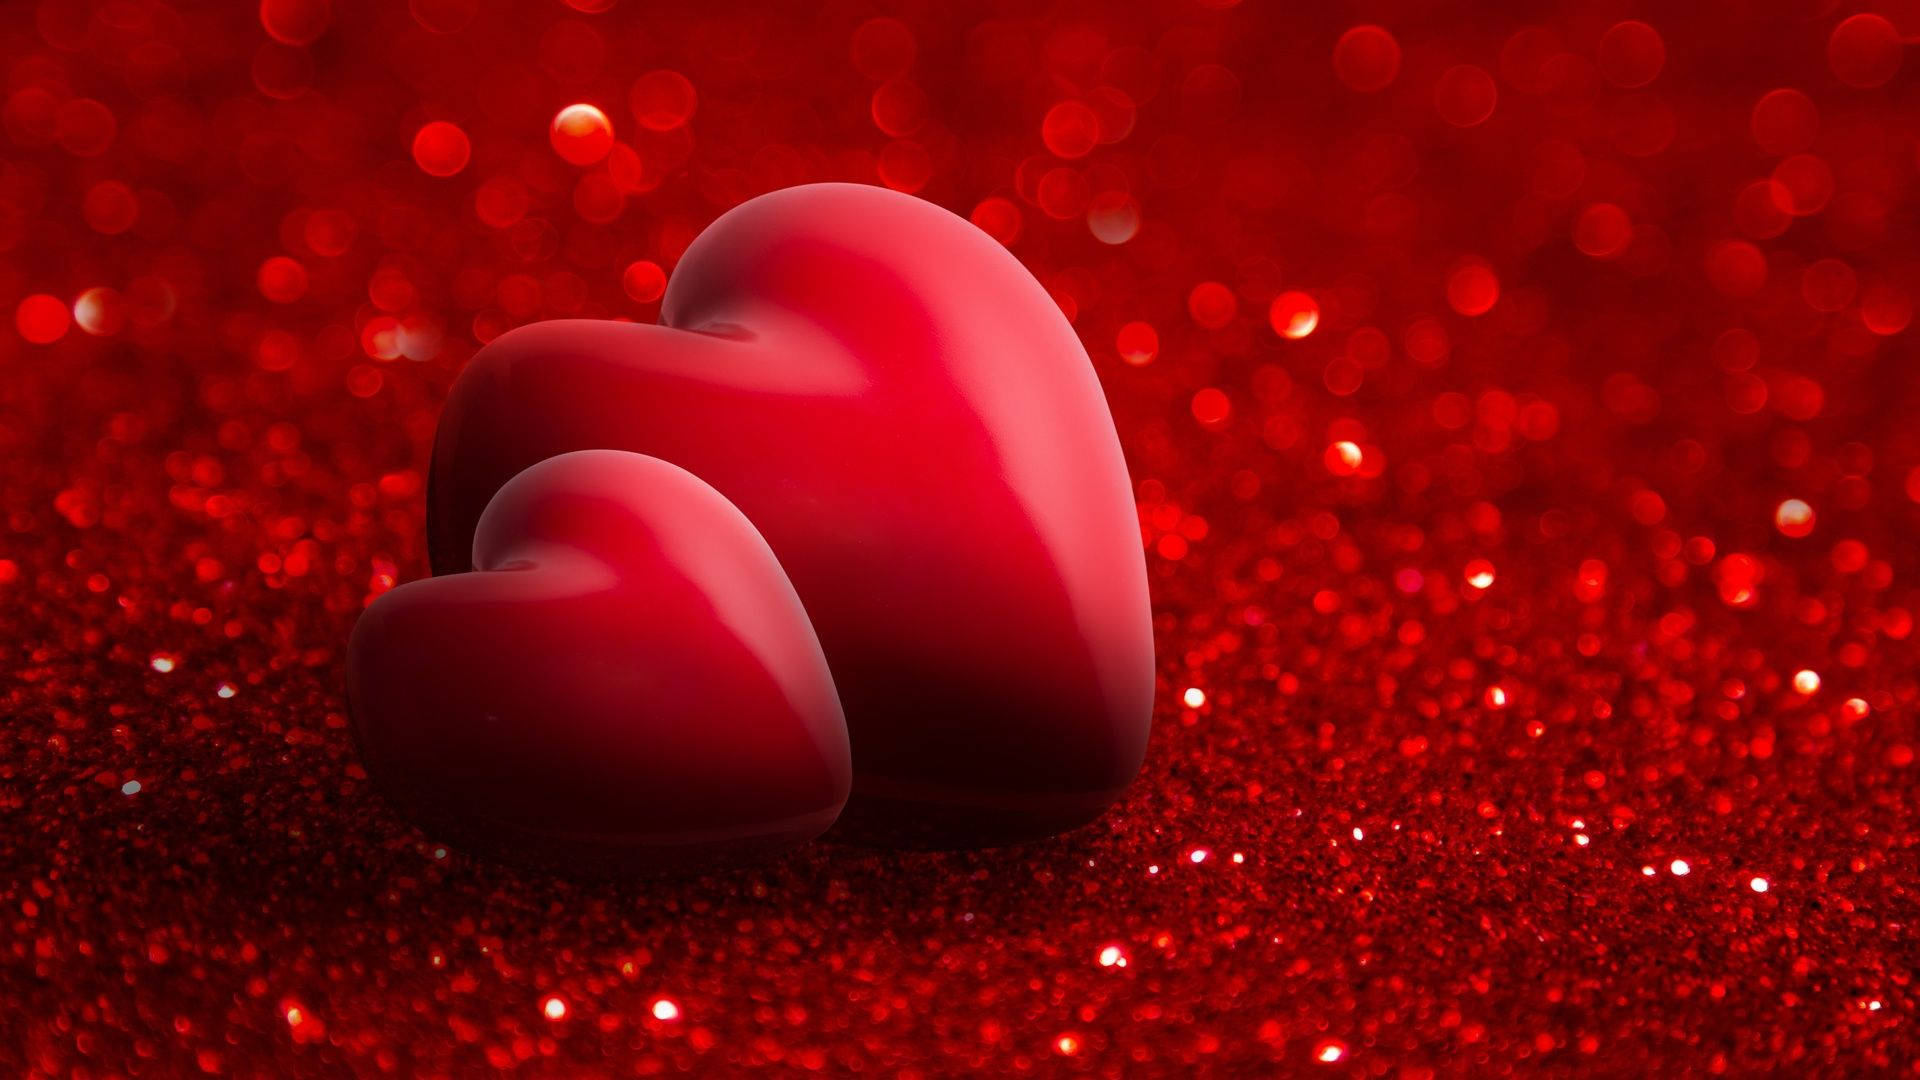 Really Cool Love 3d Red Hearts Wallpaper